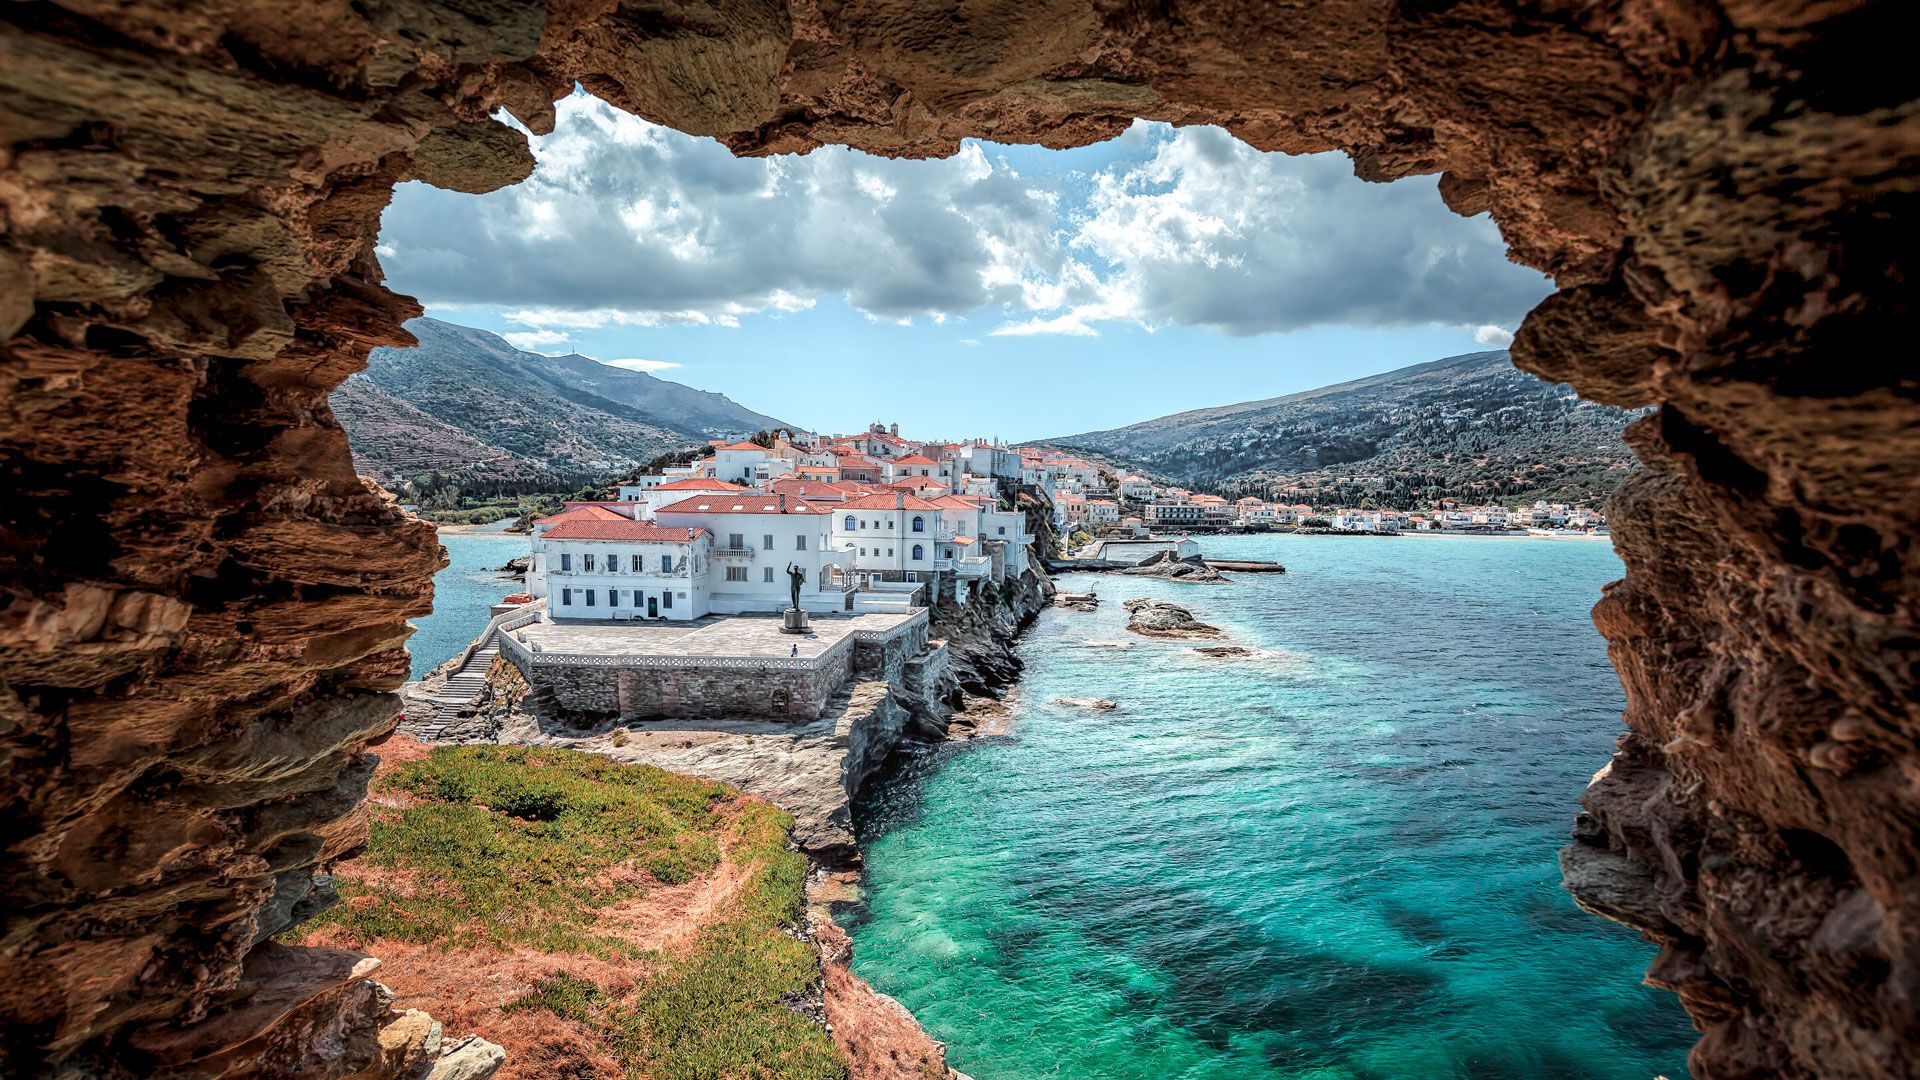 https://www.discovergreece.com/sites/default/files/styles/default/public/2020-09/The%20main%20town%2C%20Hora%2C%20is%20full%20of%20stately%20homes%20and%20neoclassical%20buildings-1.jpg